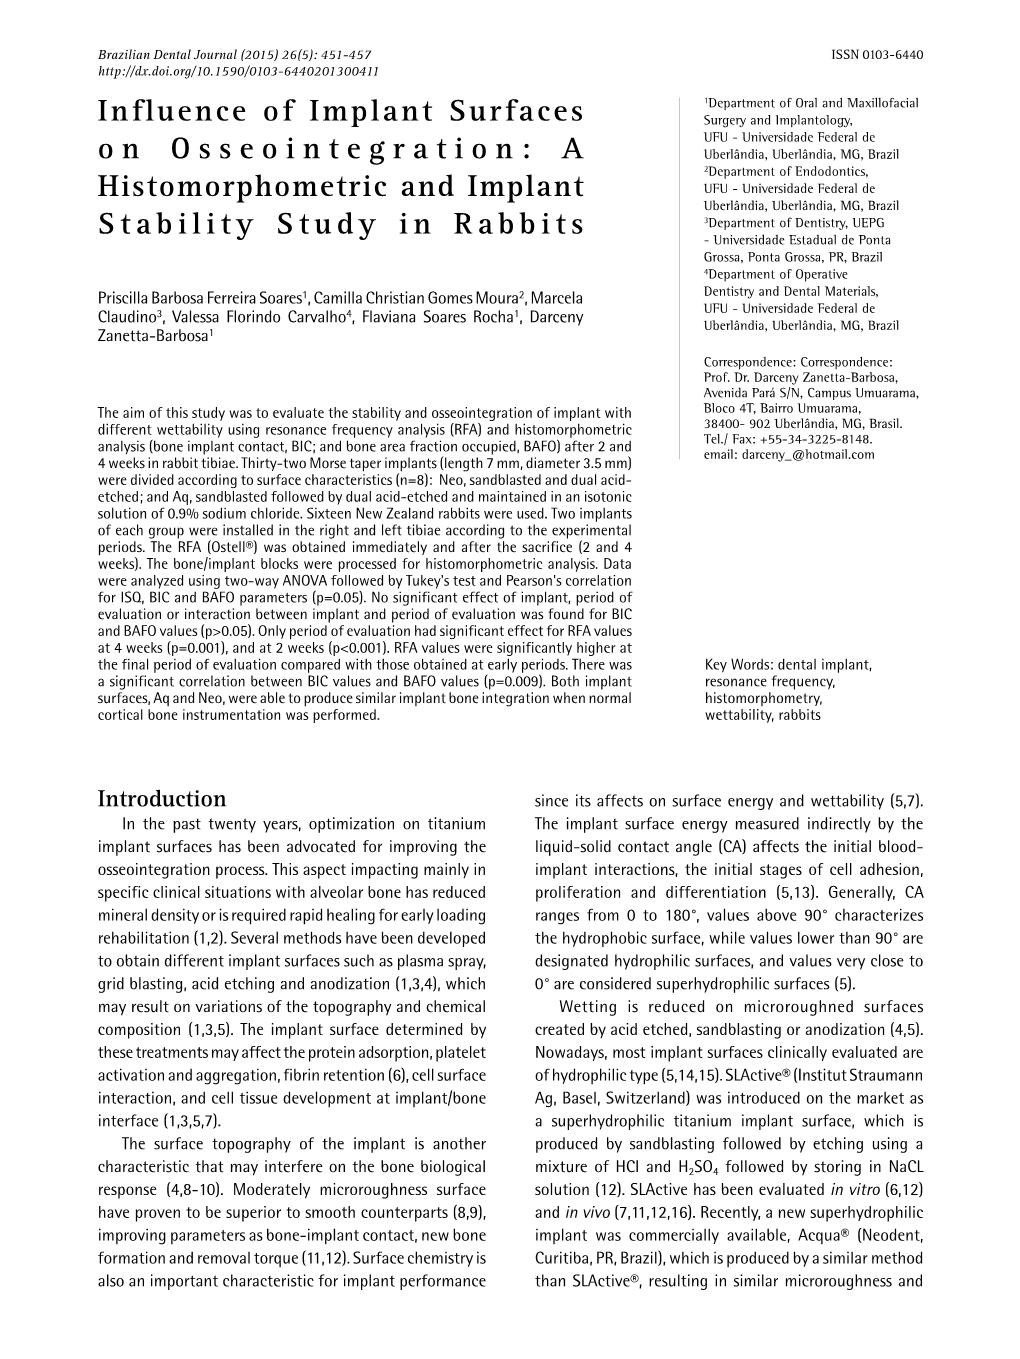 A Histomorphometric and Implant Stability Study in Rabbits